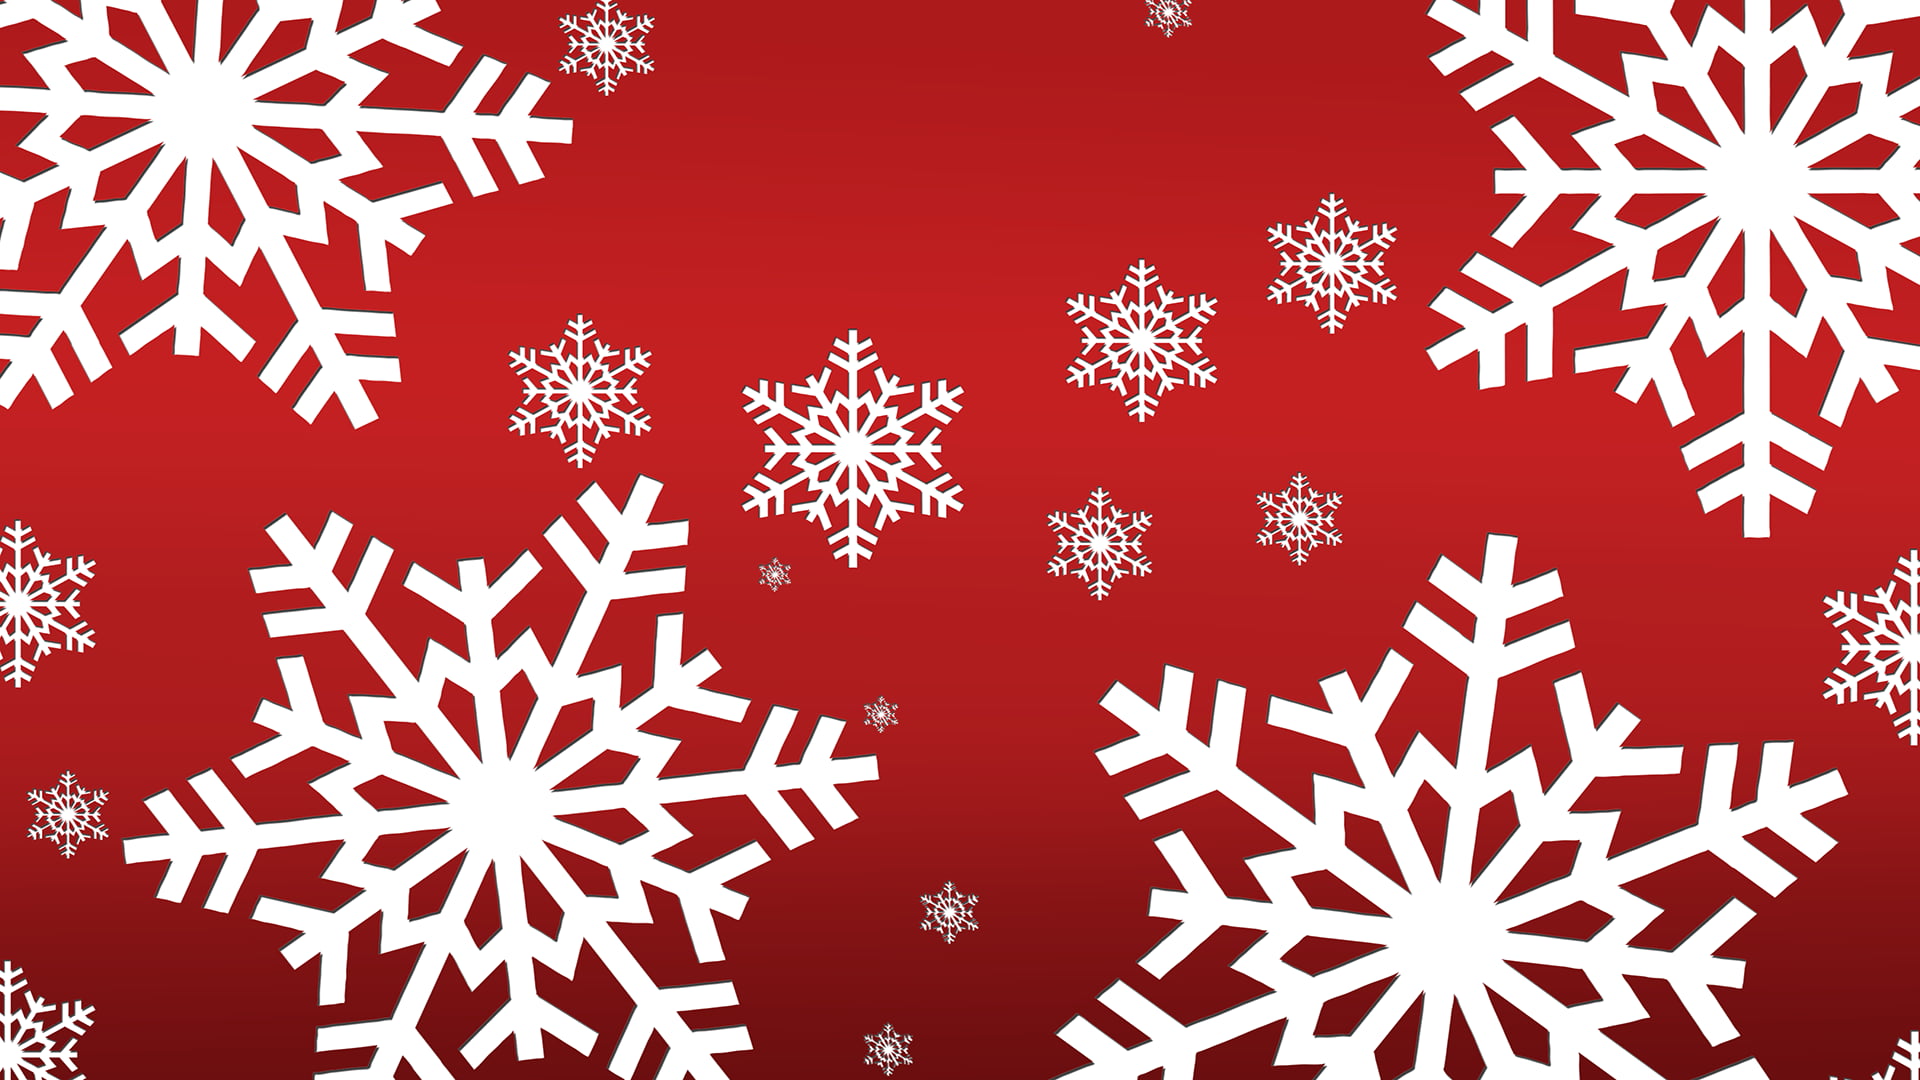 snowflakes on red background, Christmas, anime, snowflakes, red